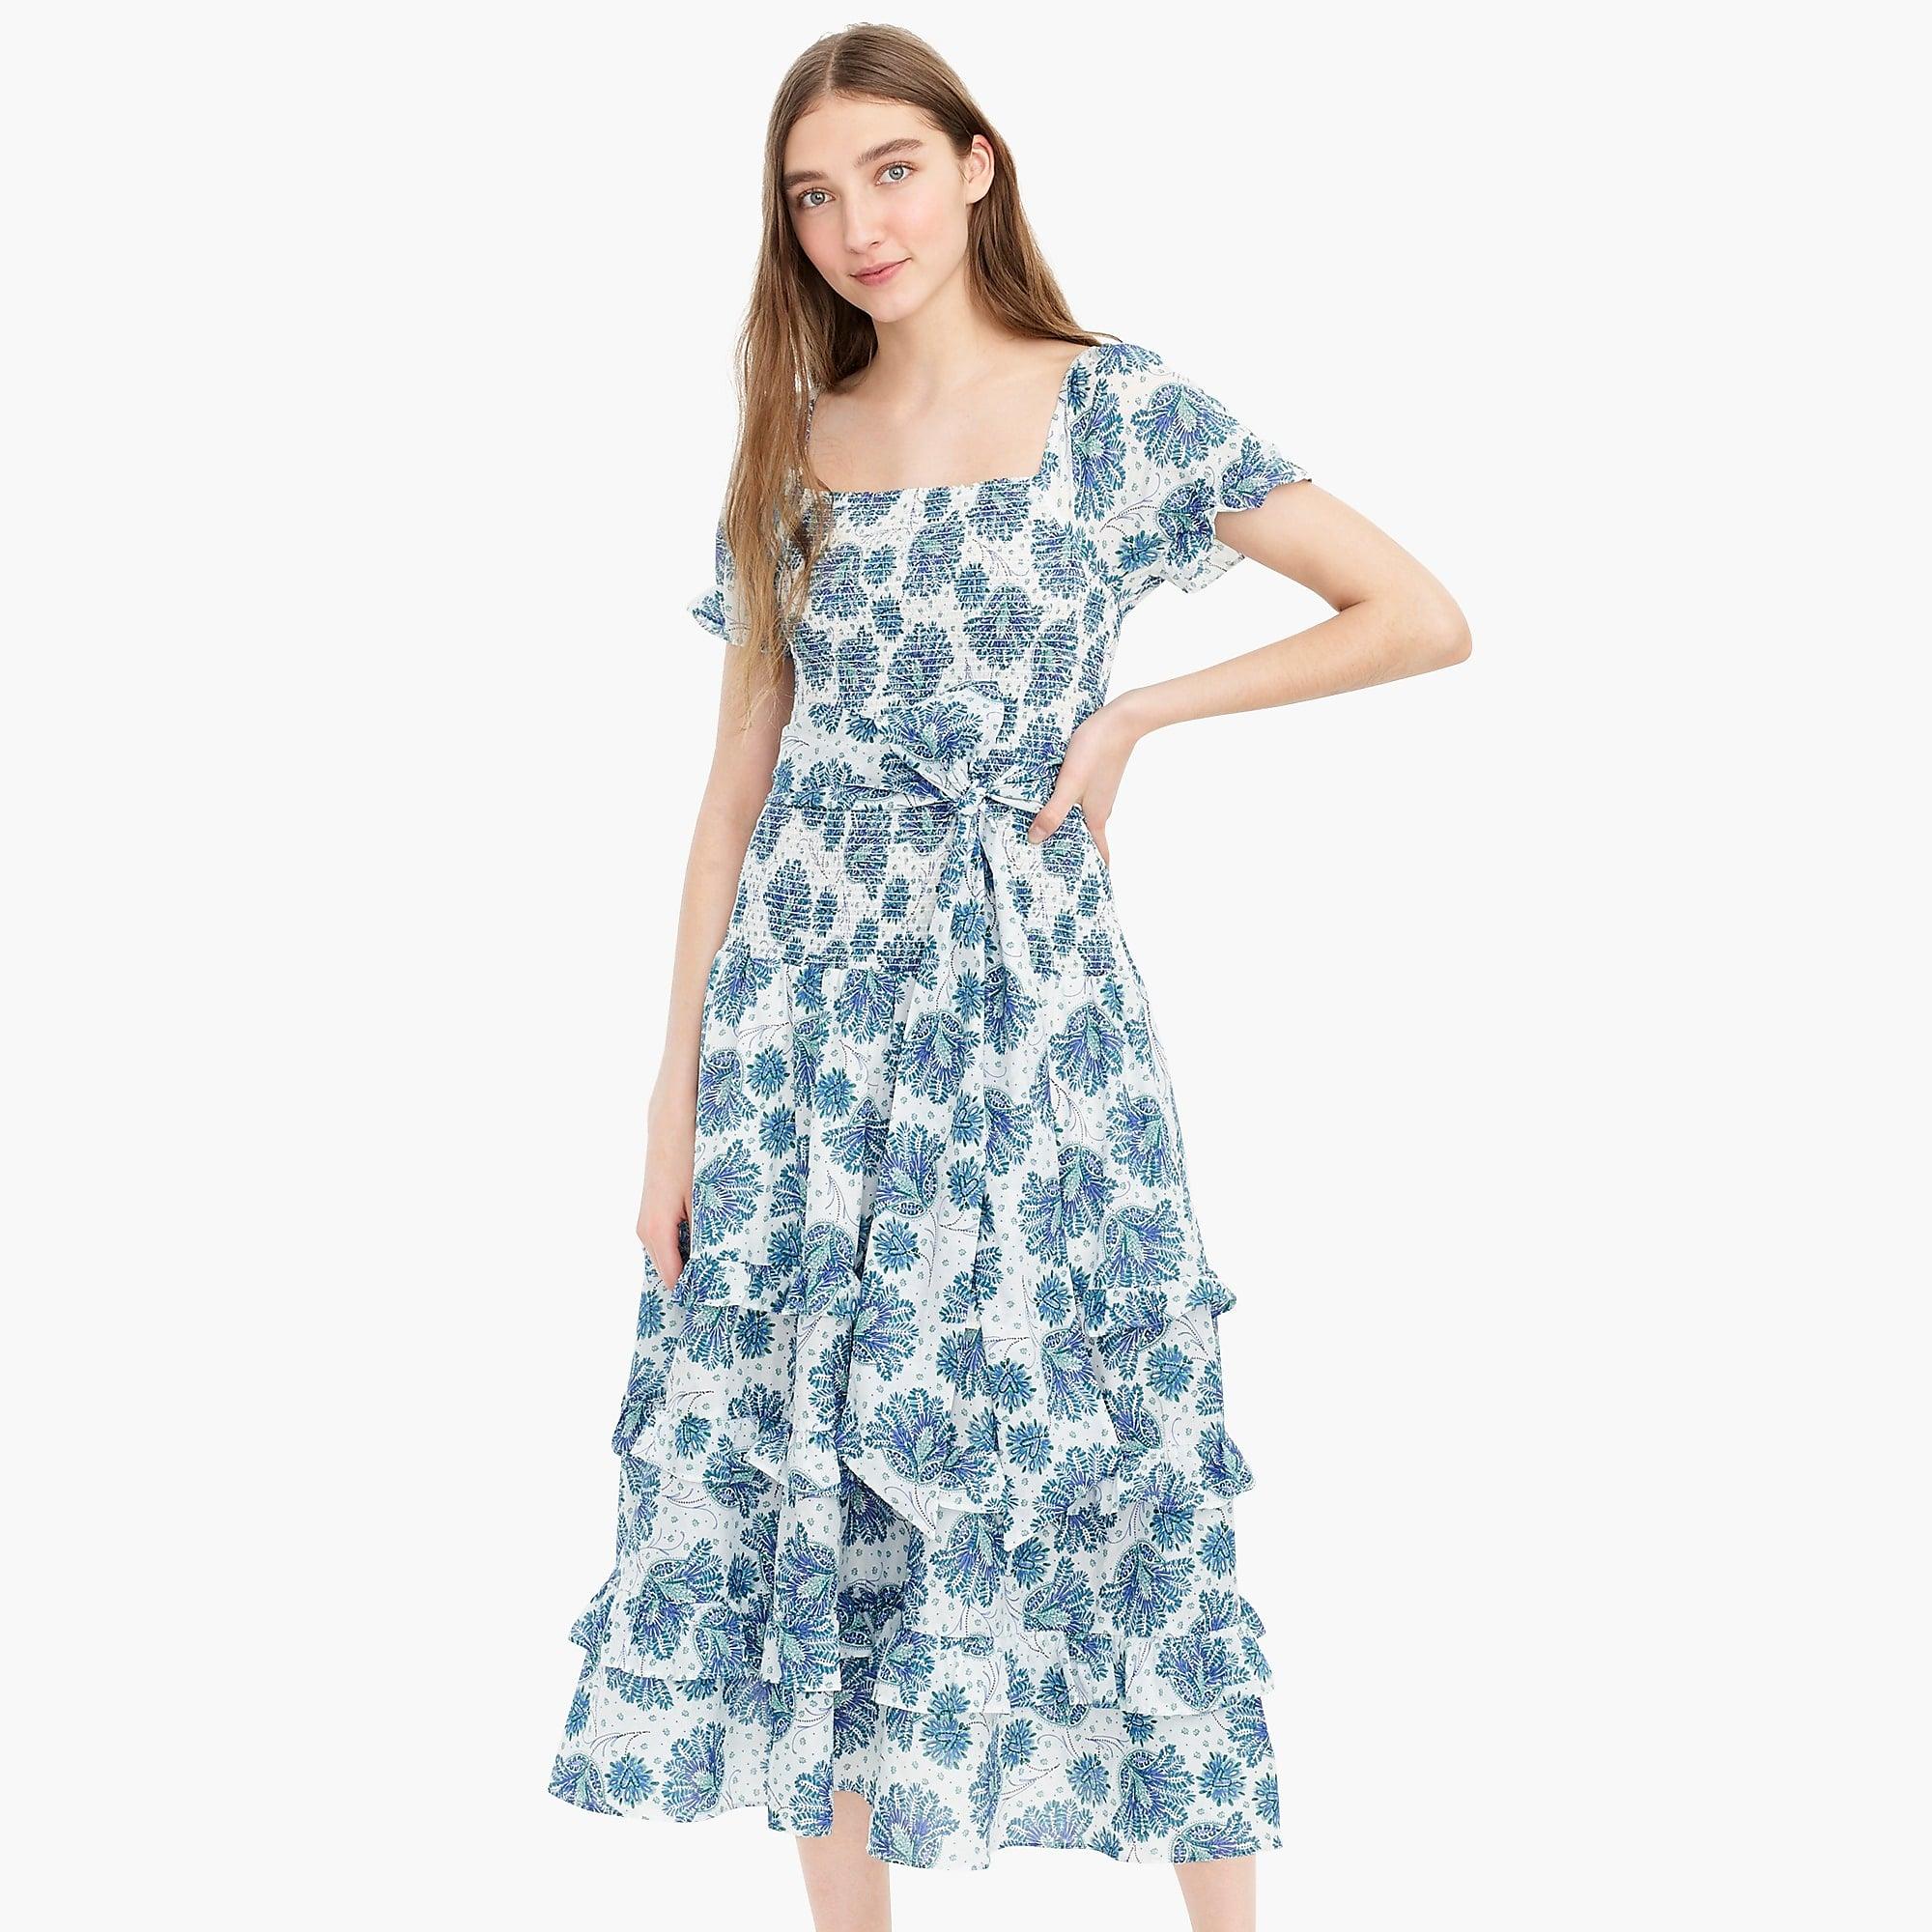 J.Crew Smocked Prairie Midi Dress In Floral Cotton Voile in Blue - Lyst